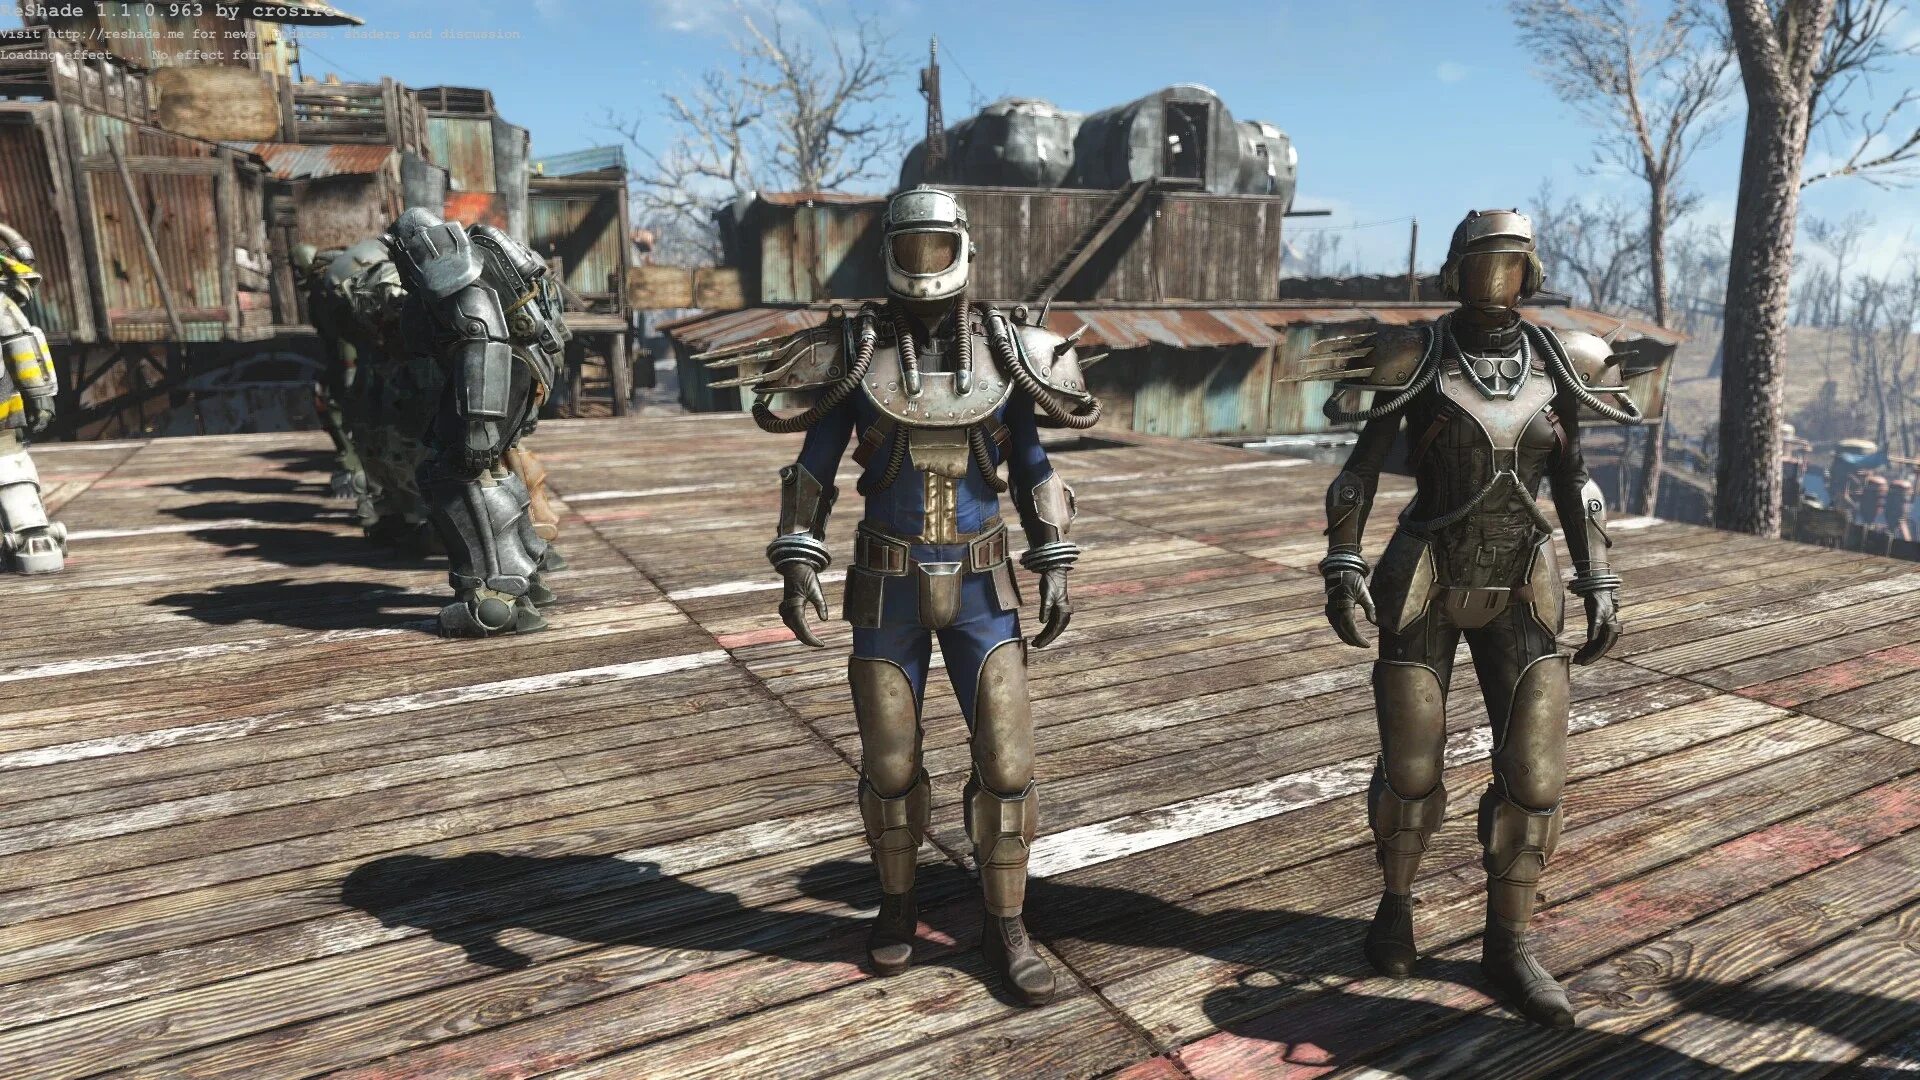 Https www fallout4 mods com. Fallout 4 Classic Metal Armor. Armor фоллаут 4. Fallout 4 броня тигана. Fallout 4 Mod Metal Armor.